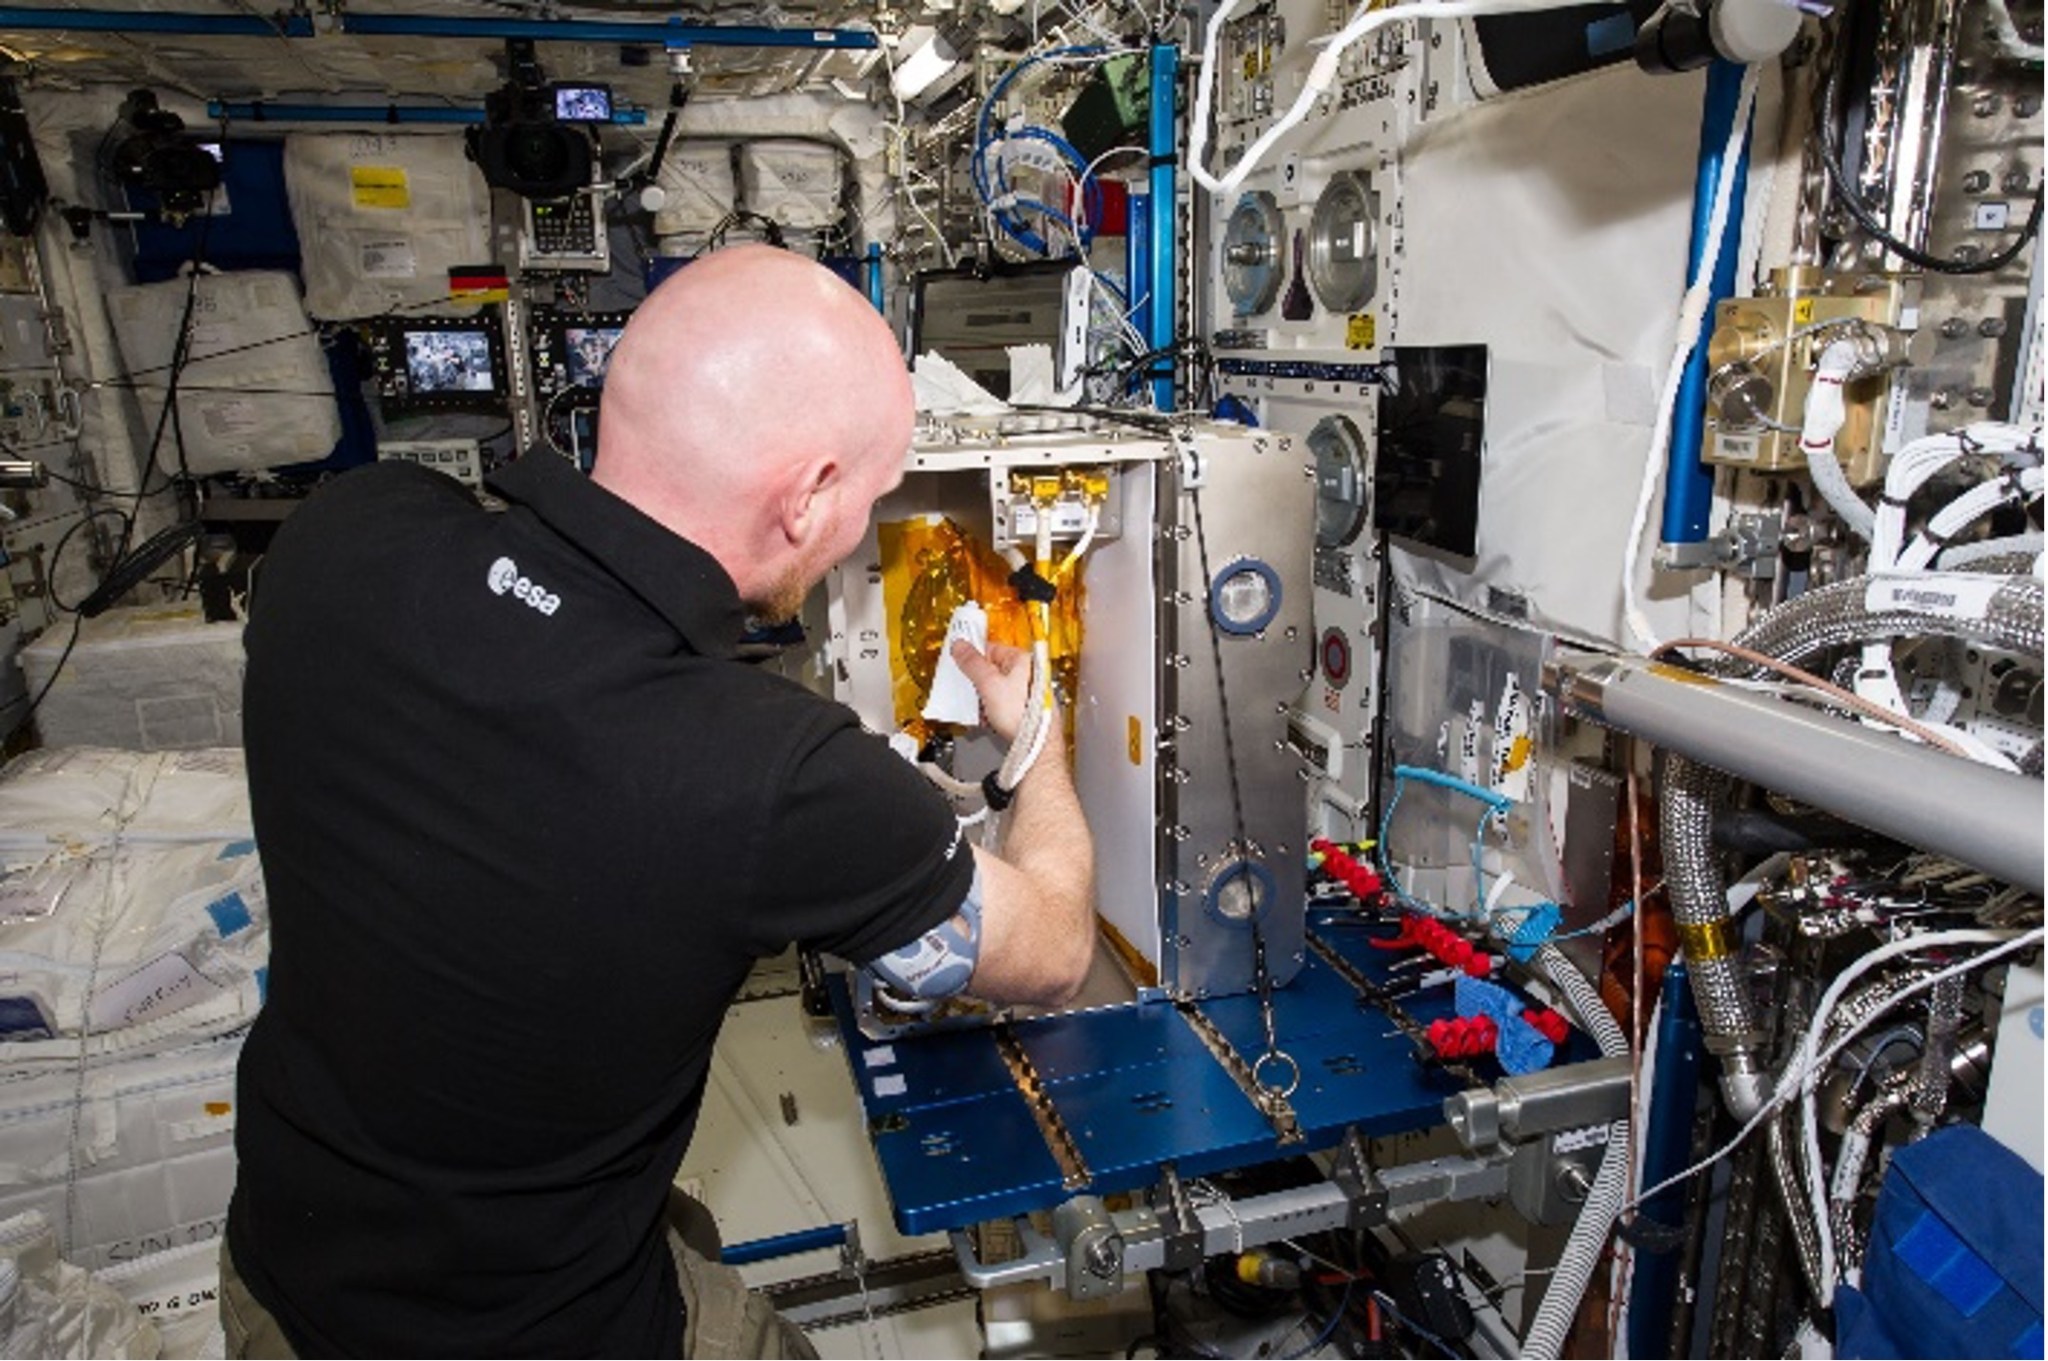 An astronaut wearing a short-sleeved black polo shirt with his back to the camera appears to be working on a piece of metal equipment, The equipment is shaped rectangular-shaped and juts out from a wall of exposed wires and other metal parts.